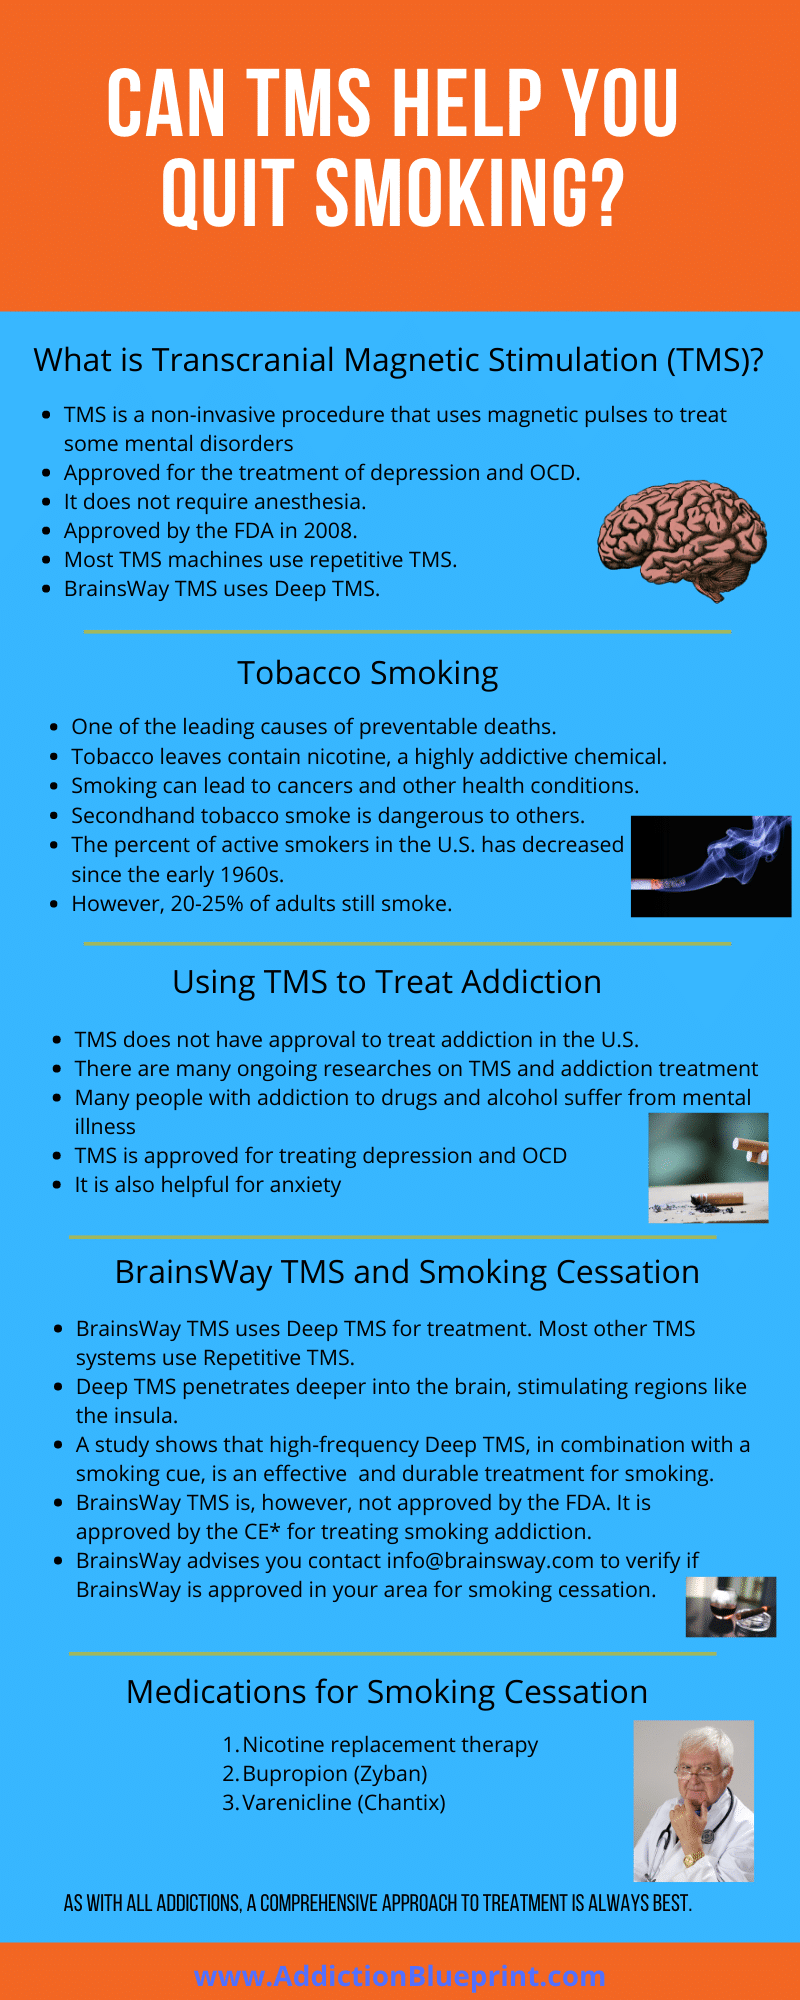 Can TMS help you Quit Smoking?